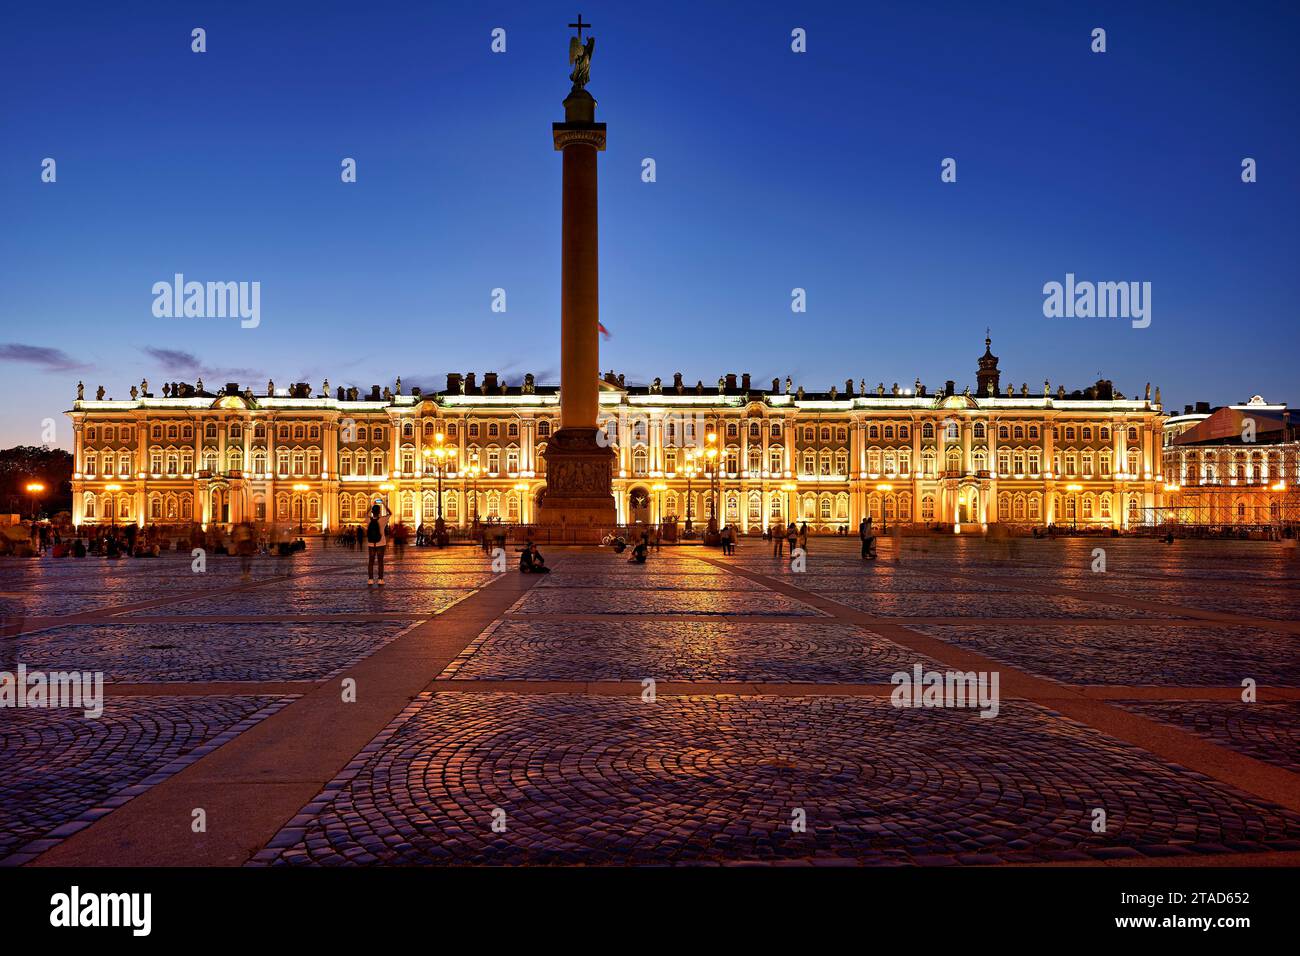 St. Petersburg Russia. Winter Palace in Palace Square Stock Photo